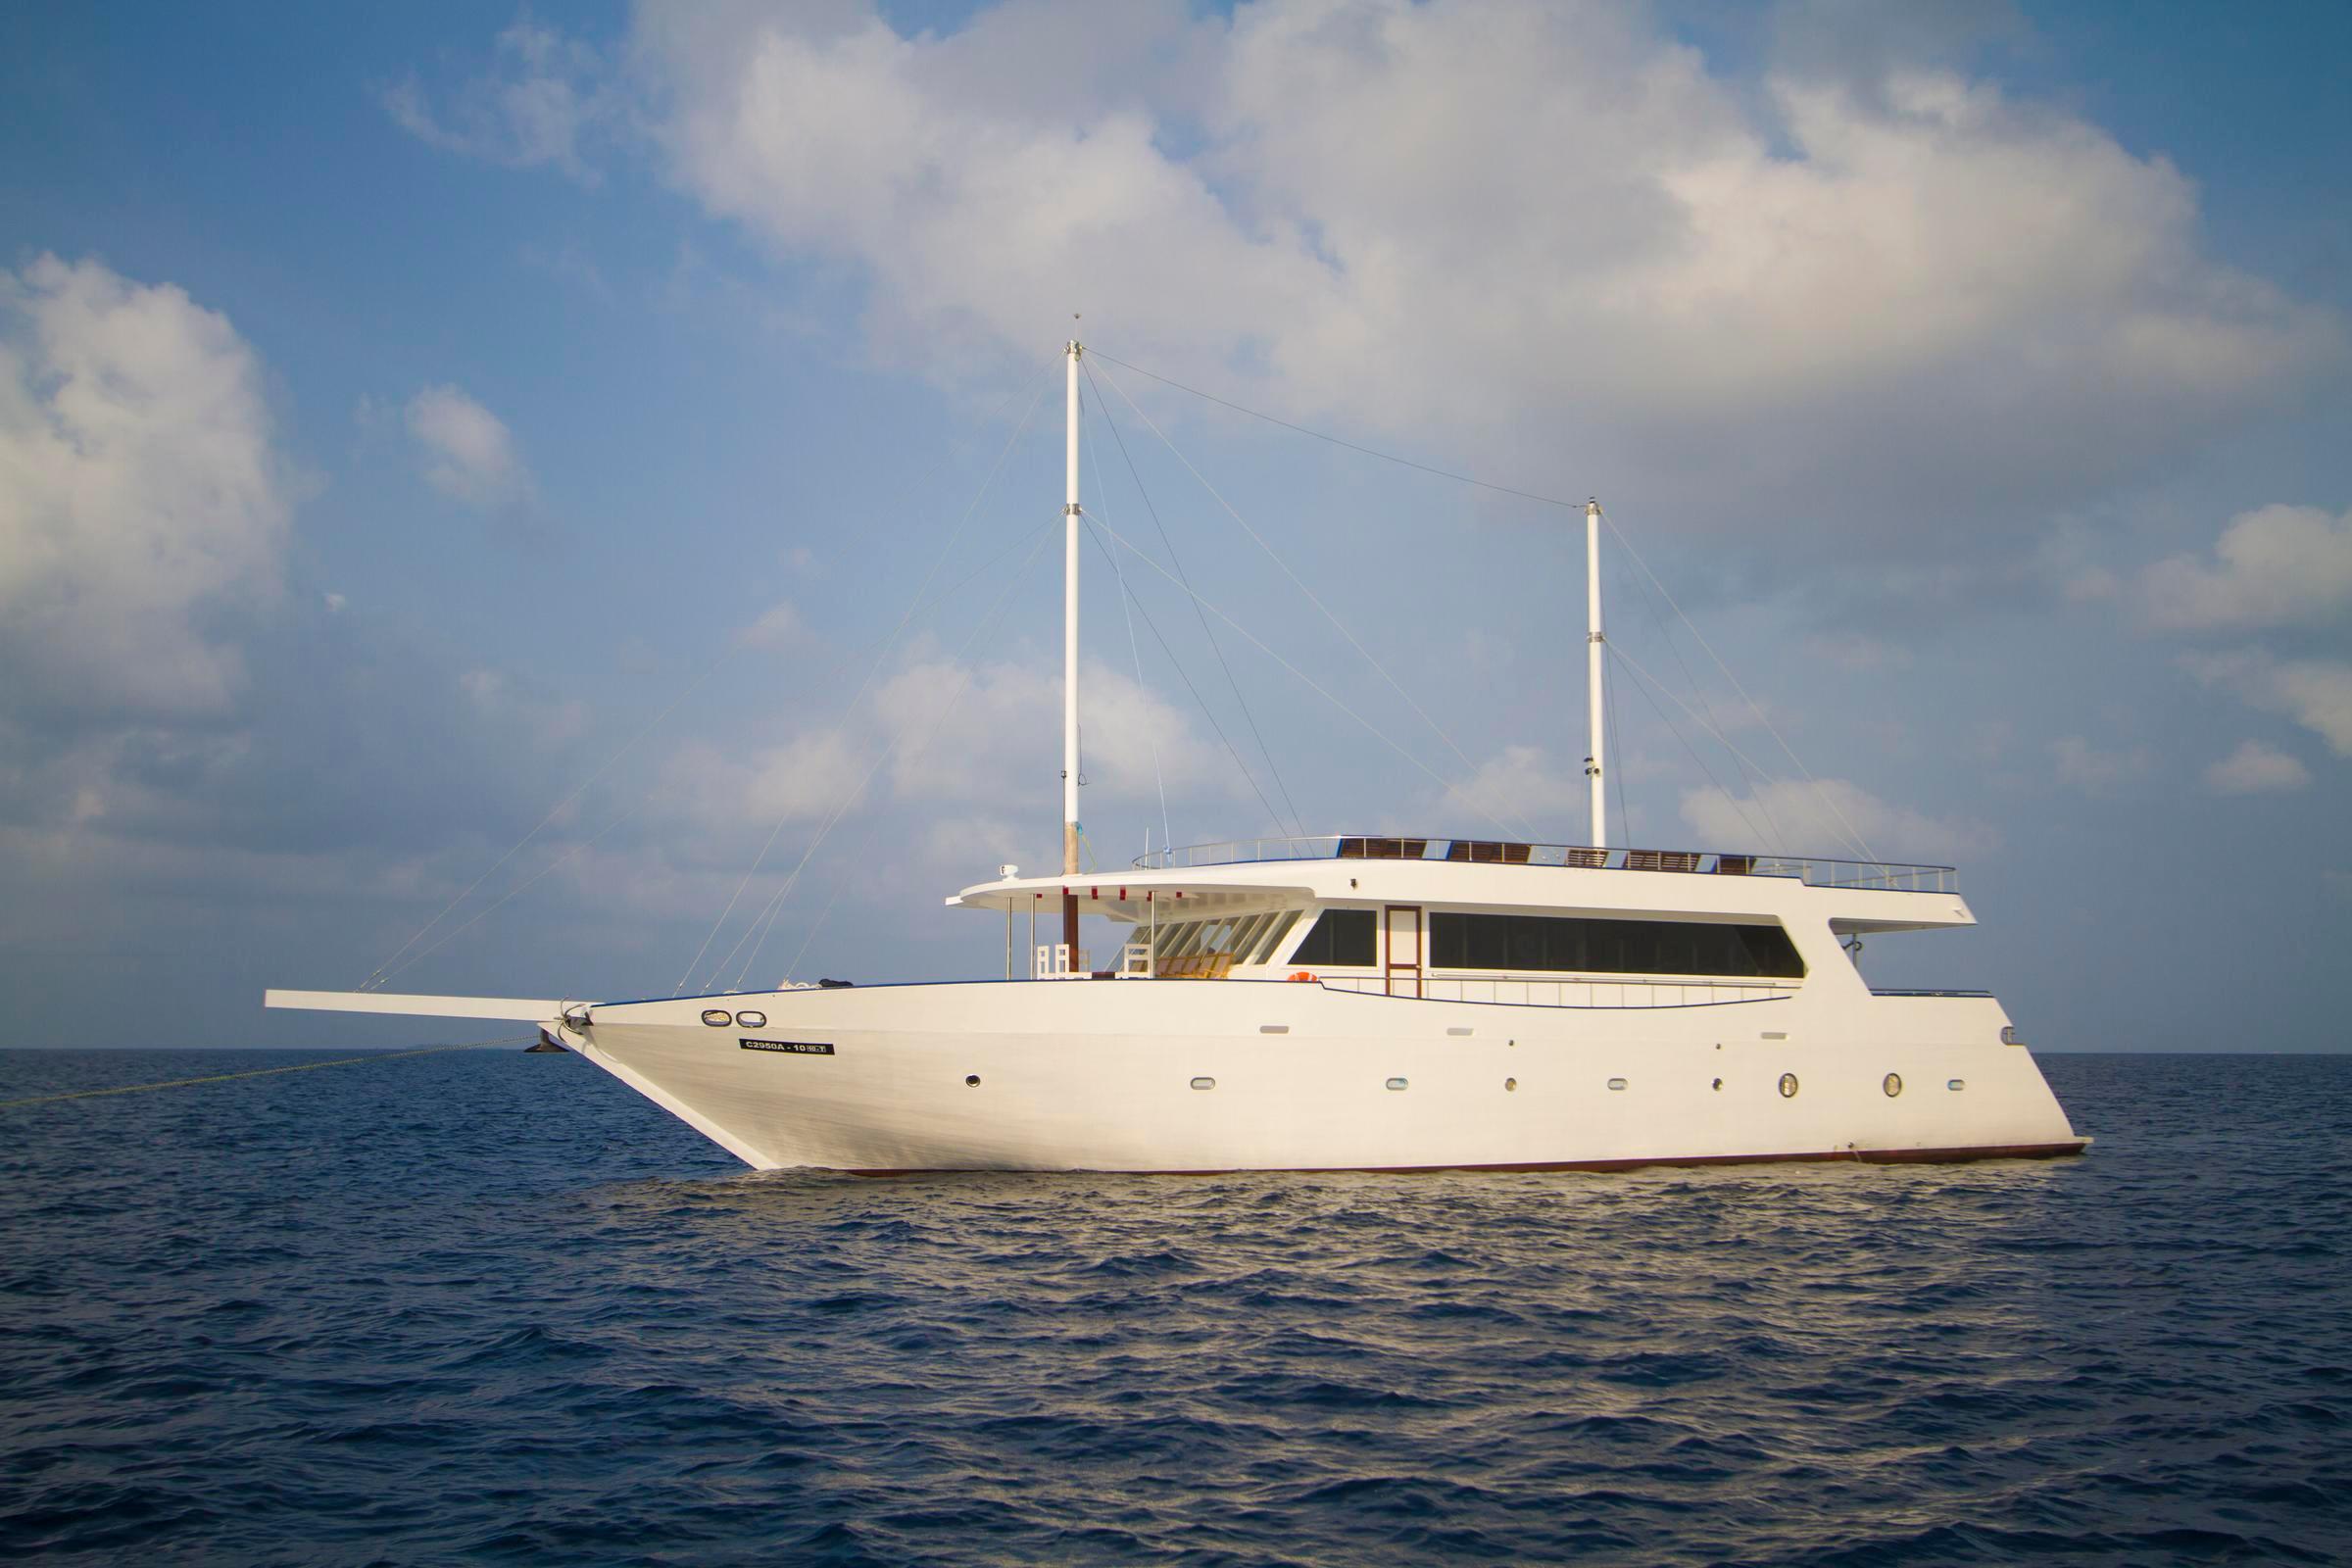 Maldives Sailing with G Adventures with a stopover in Dubai - SOLD OUT